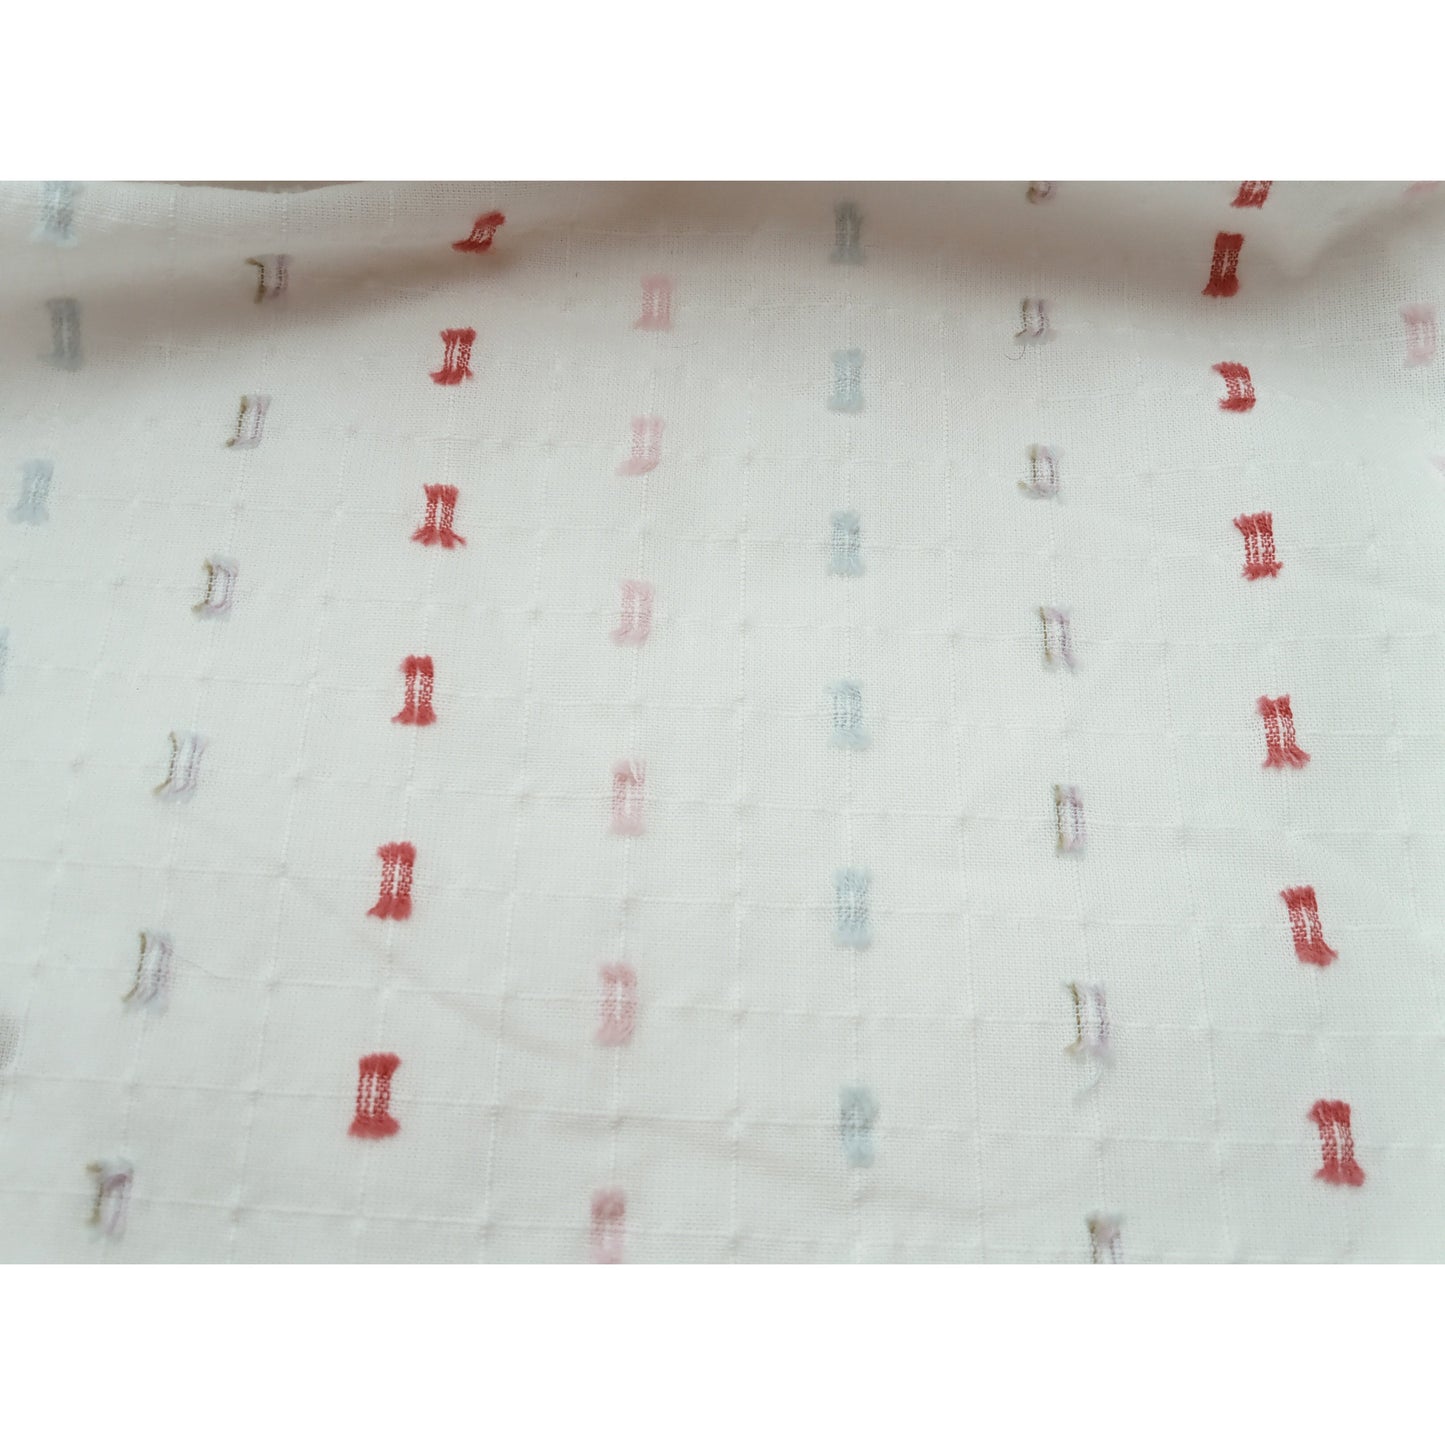 Bows embellished woven cotton fabric - 1.50mtrs